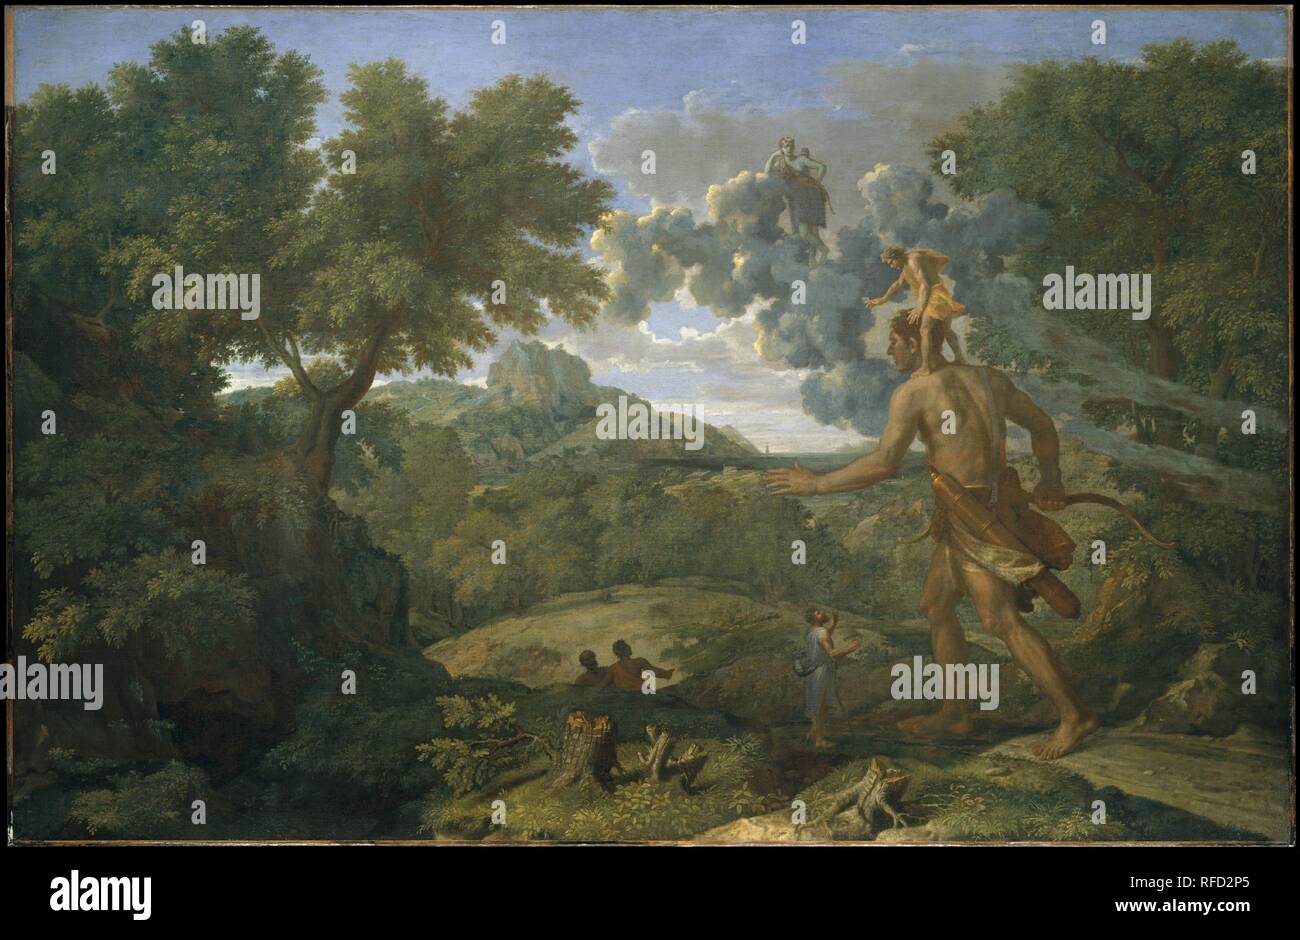 Blind Orion Searching for the Rising Sun. Artist: Nicolas Poussin (French, Les Andelys 1594-1665 Rome). Dimensions: 46 7/8 x 72 in. (119.1 x 182.9 cm). Date: 1658.  For his depiction of the gigantic hunter, painted for Michel Passart, Poussin drew on the Greek writer Lucian: 'Orion who is blind, is carrying Cedalion, and the latter, riding on his back, is showing him the way to the sunlight. The rising sun is healing [his] blindness.' Poussin also studied the sixteenth-century commentary on the tale by Natalis Comes that affords a meteorological interpretation. He therefore added Diana, standi Stock Photo